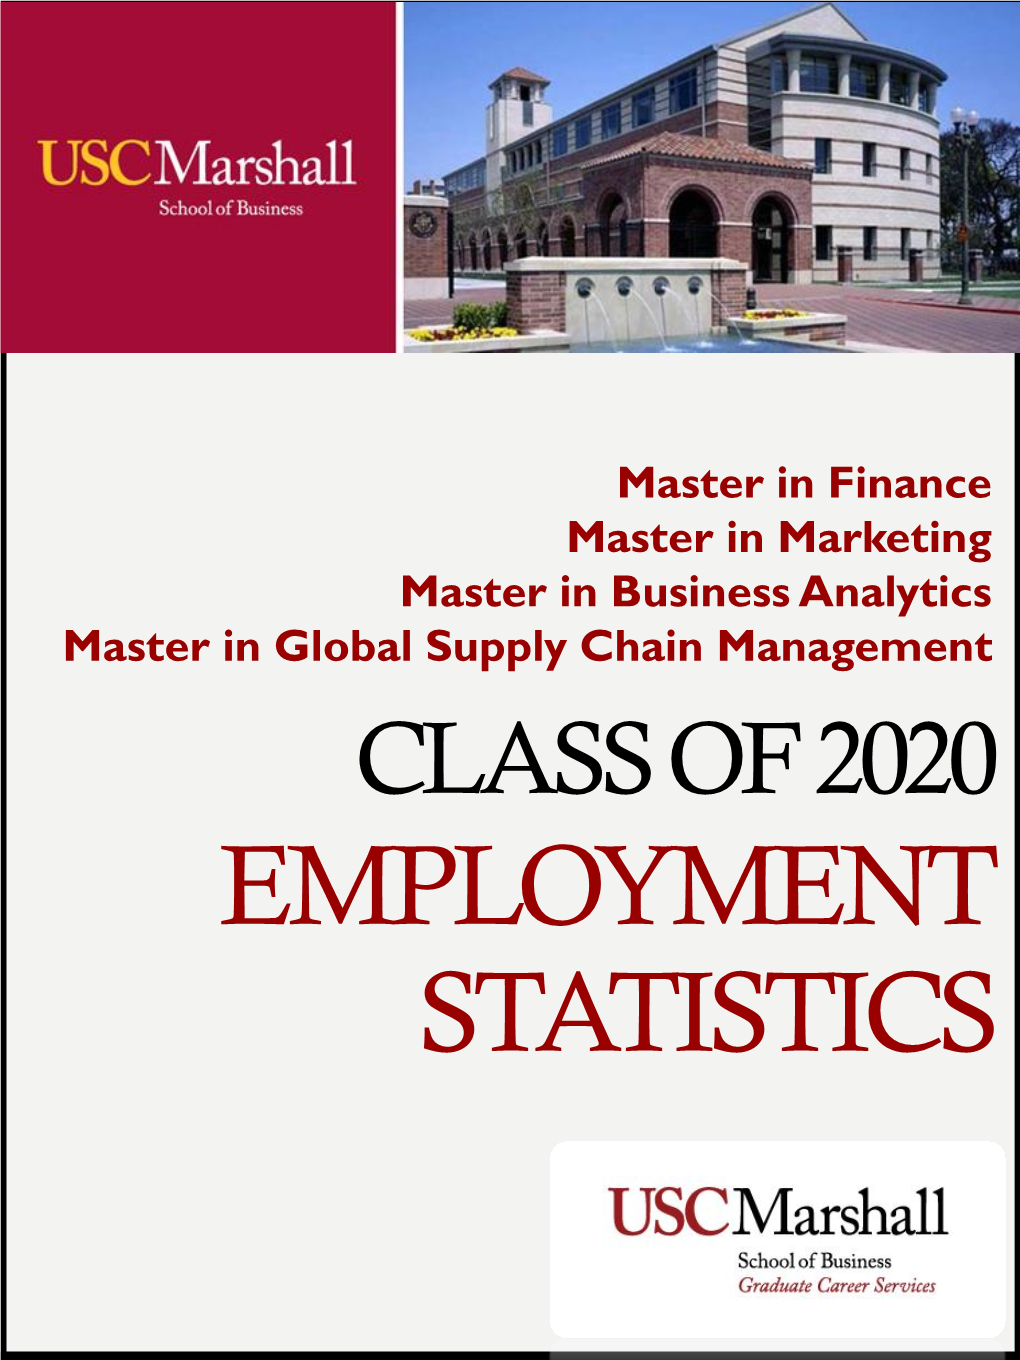 Mba Class of 2020 Full-Time Employment Statistics